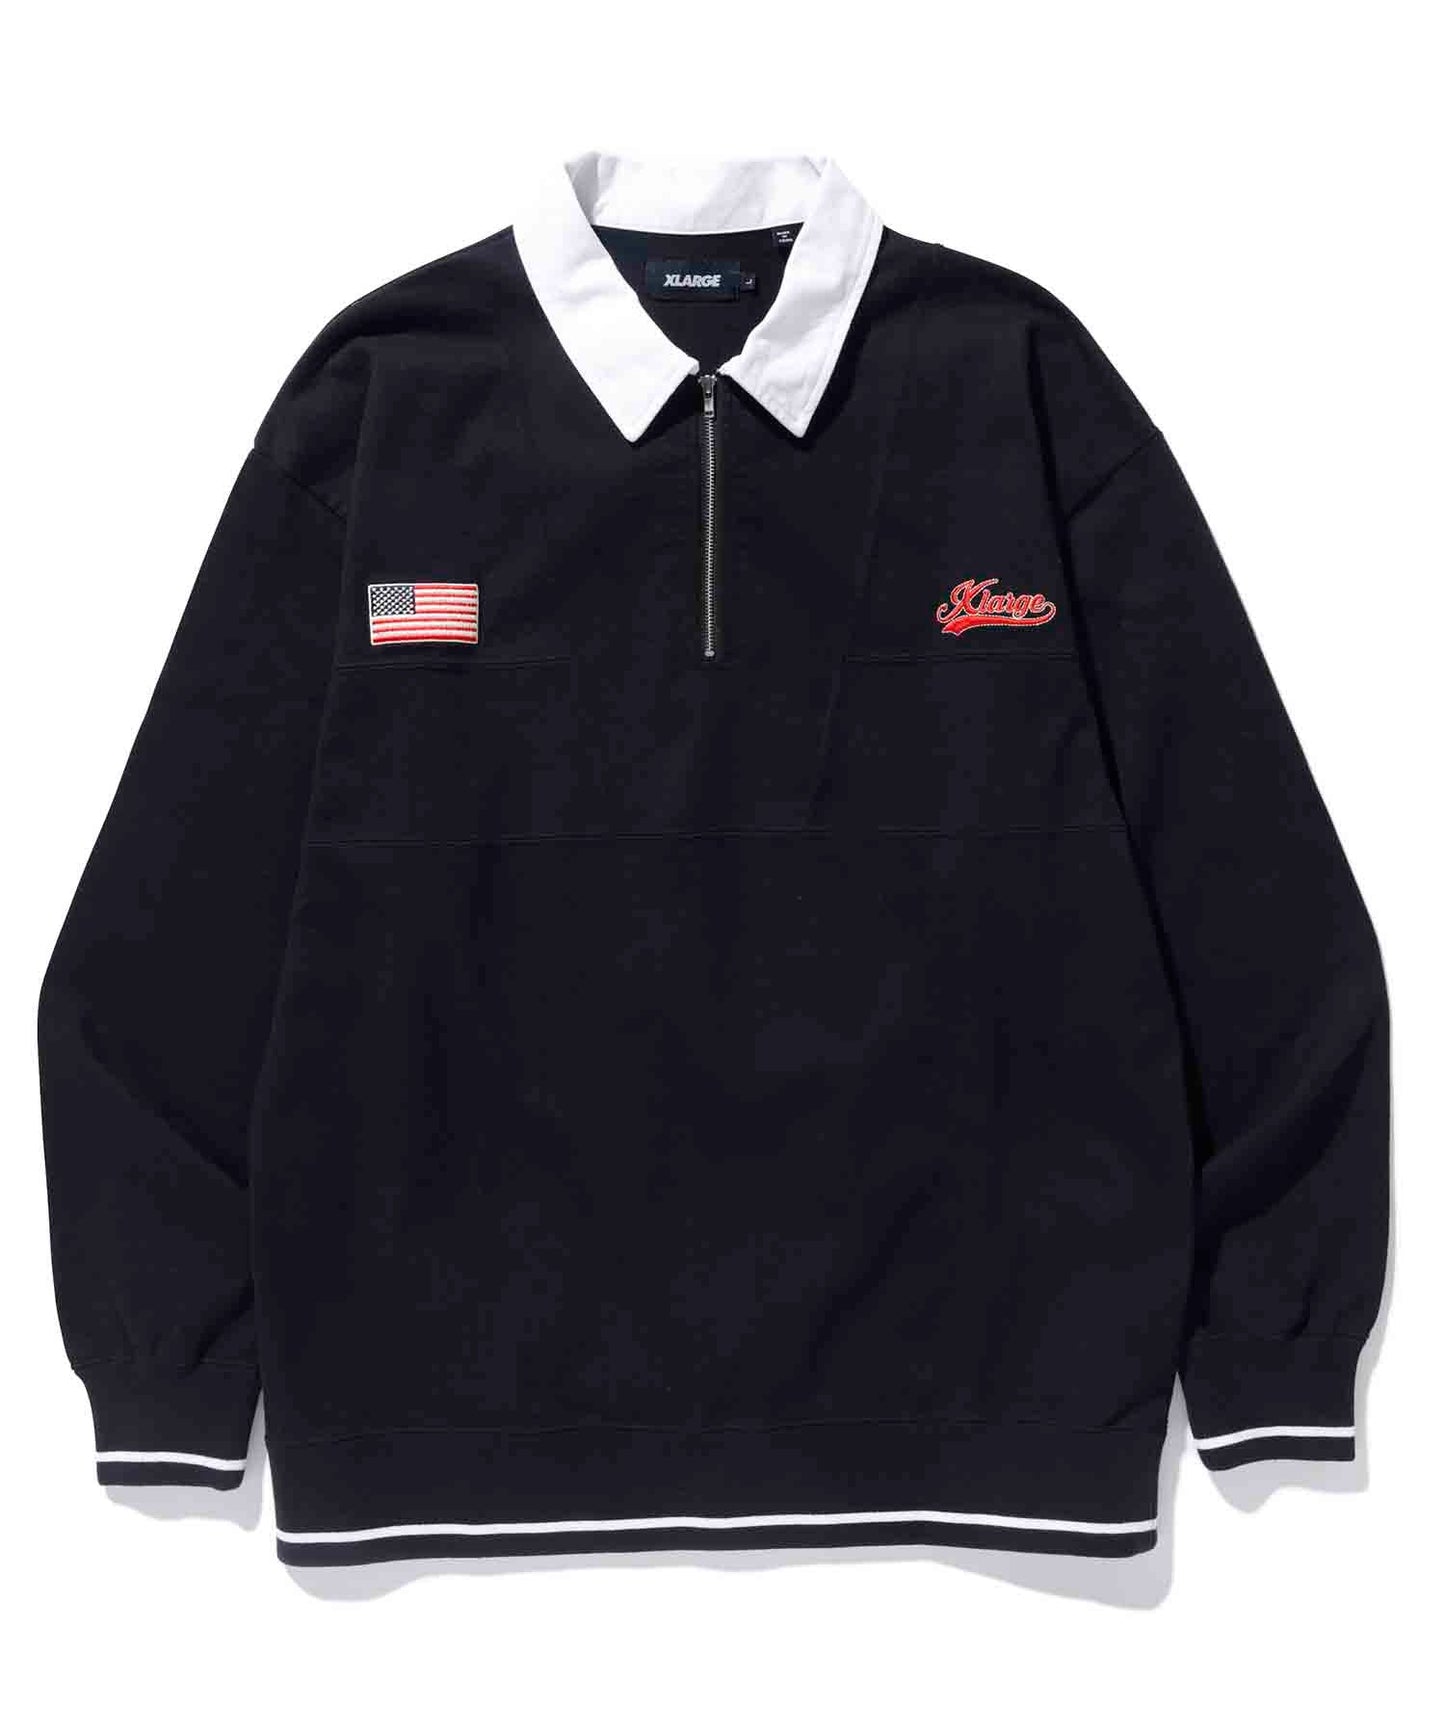 EMBROIDERED RUGBY SHIRT